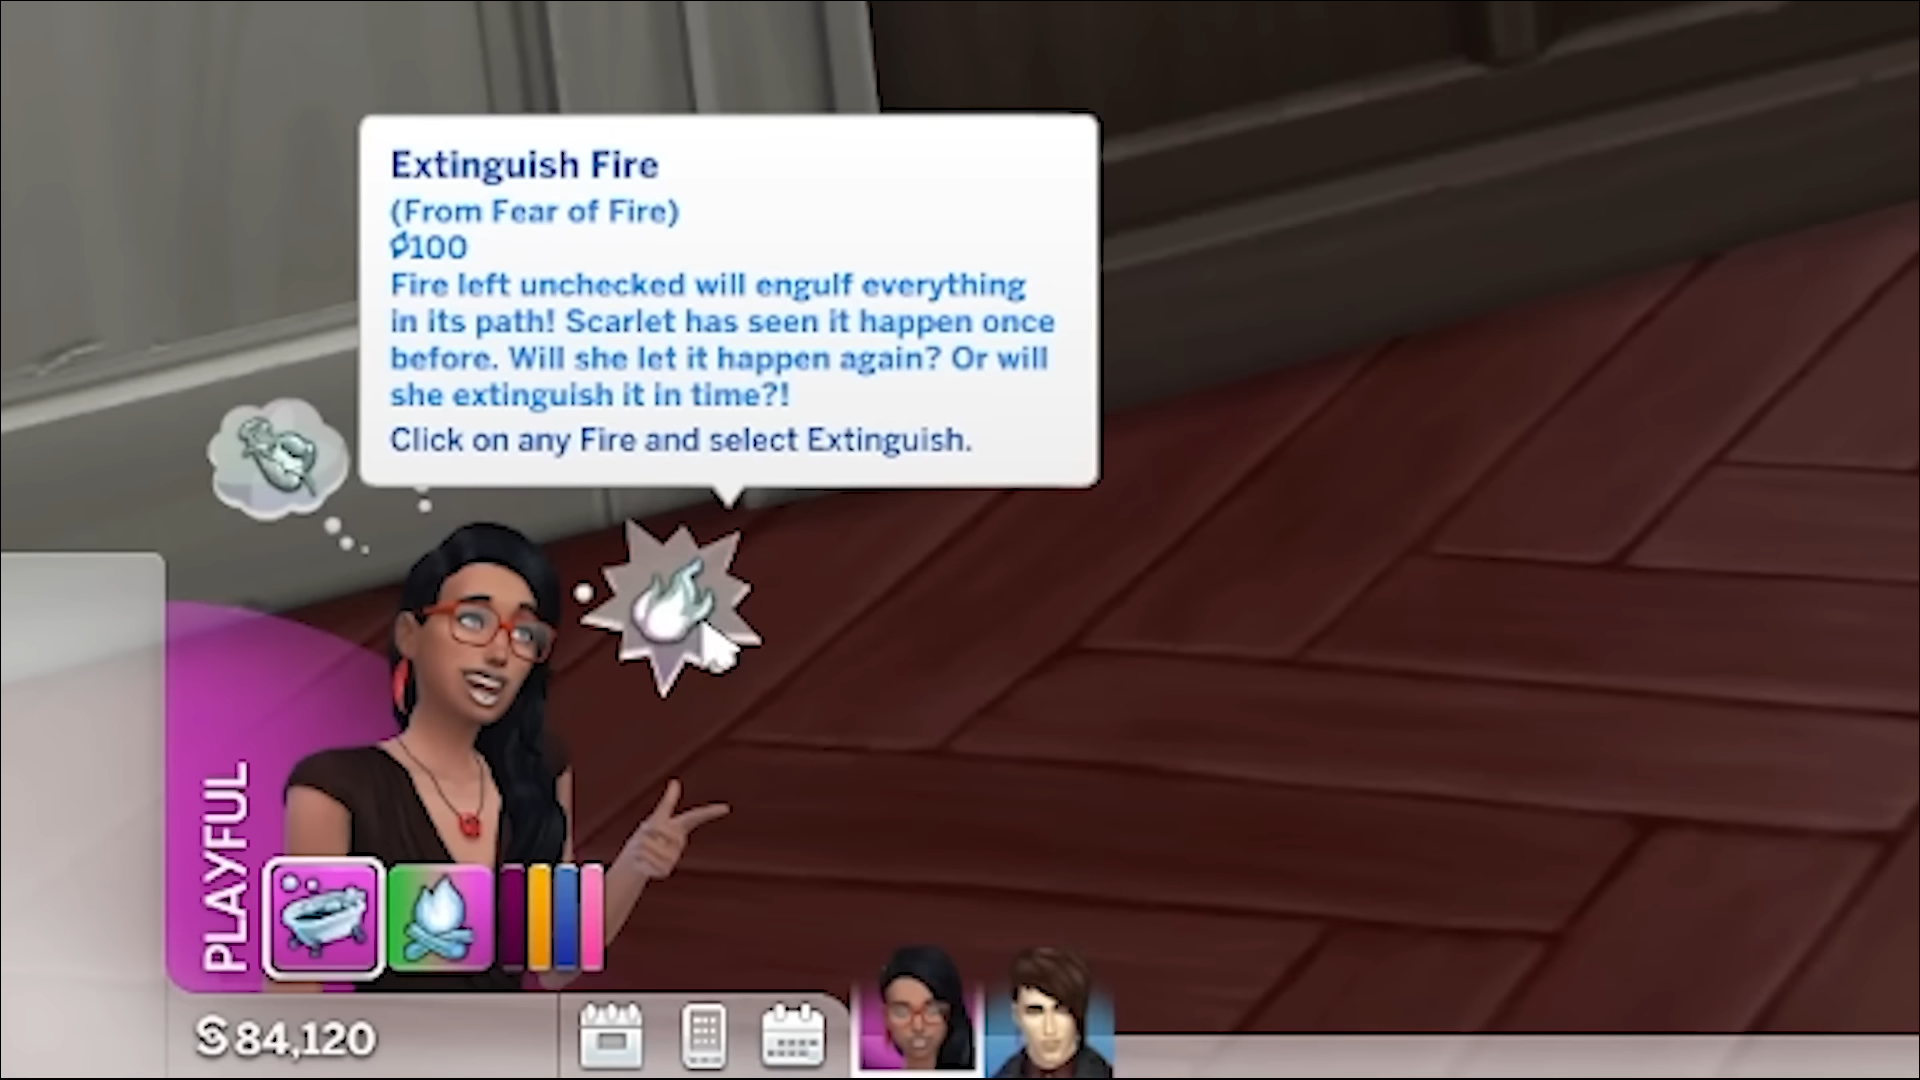 All Fears Sims 4 How to Get Rid of Fears in The Sims 4